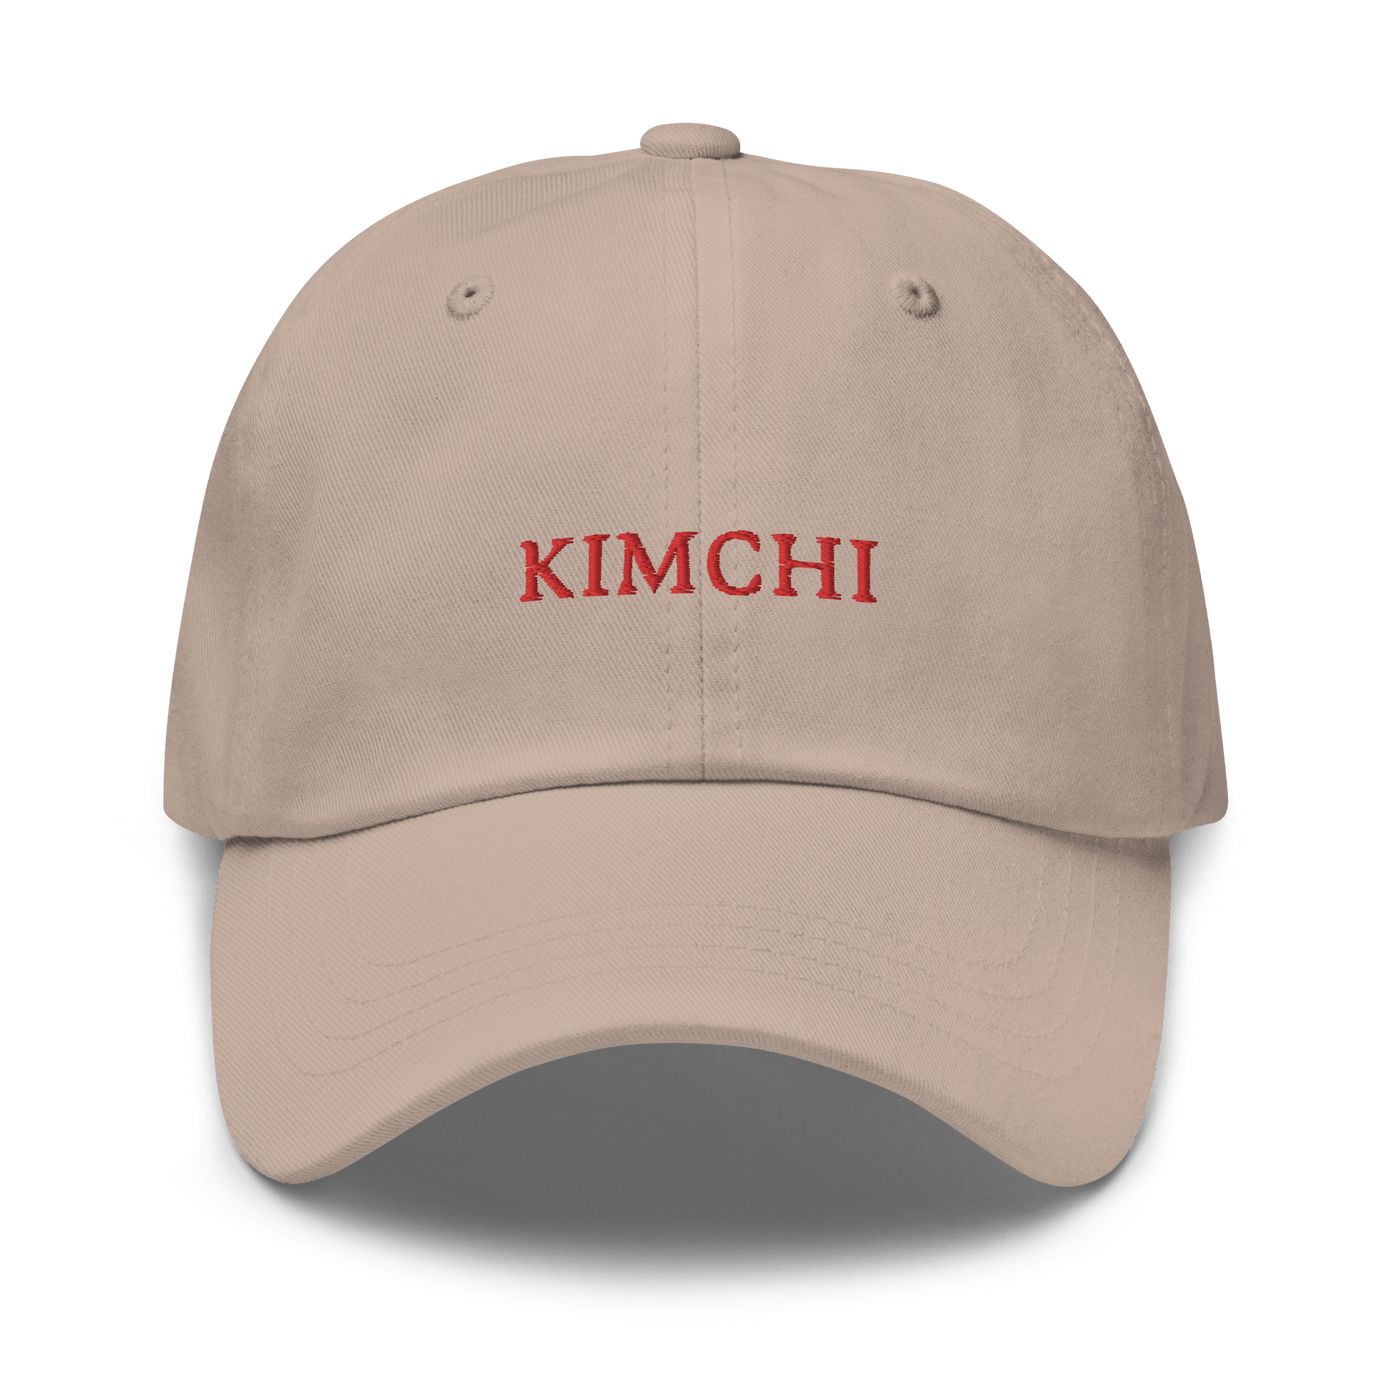 Kimchi Dad hat - Stone - - Just Another Cap Store